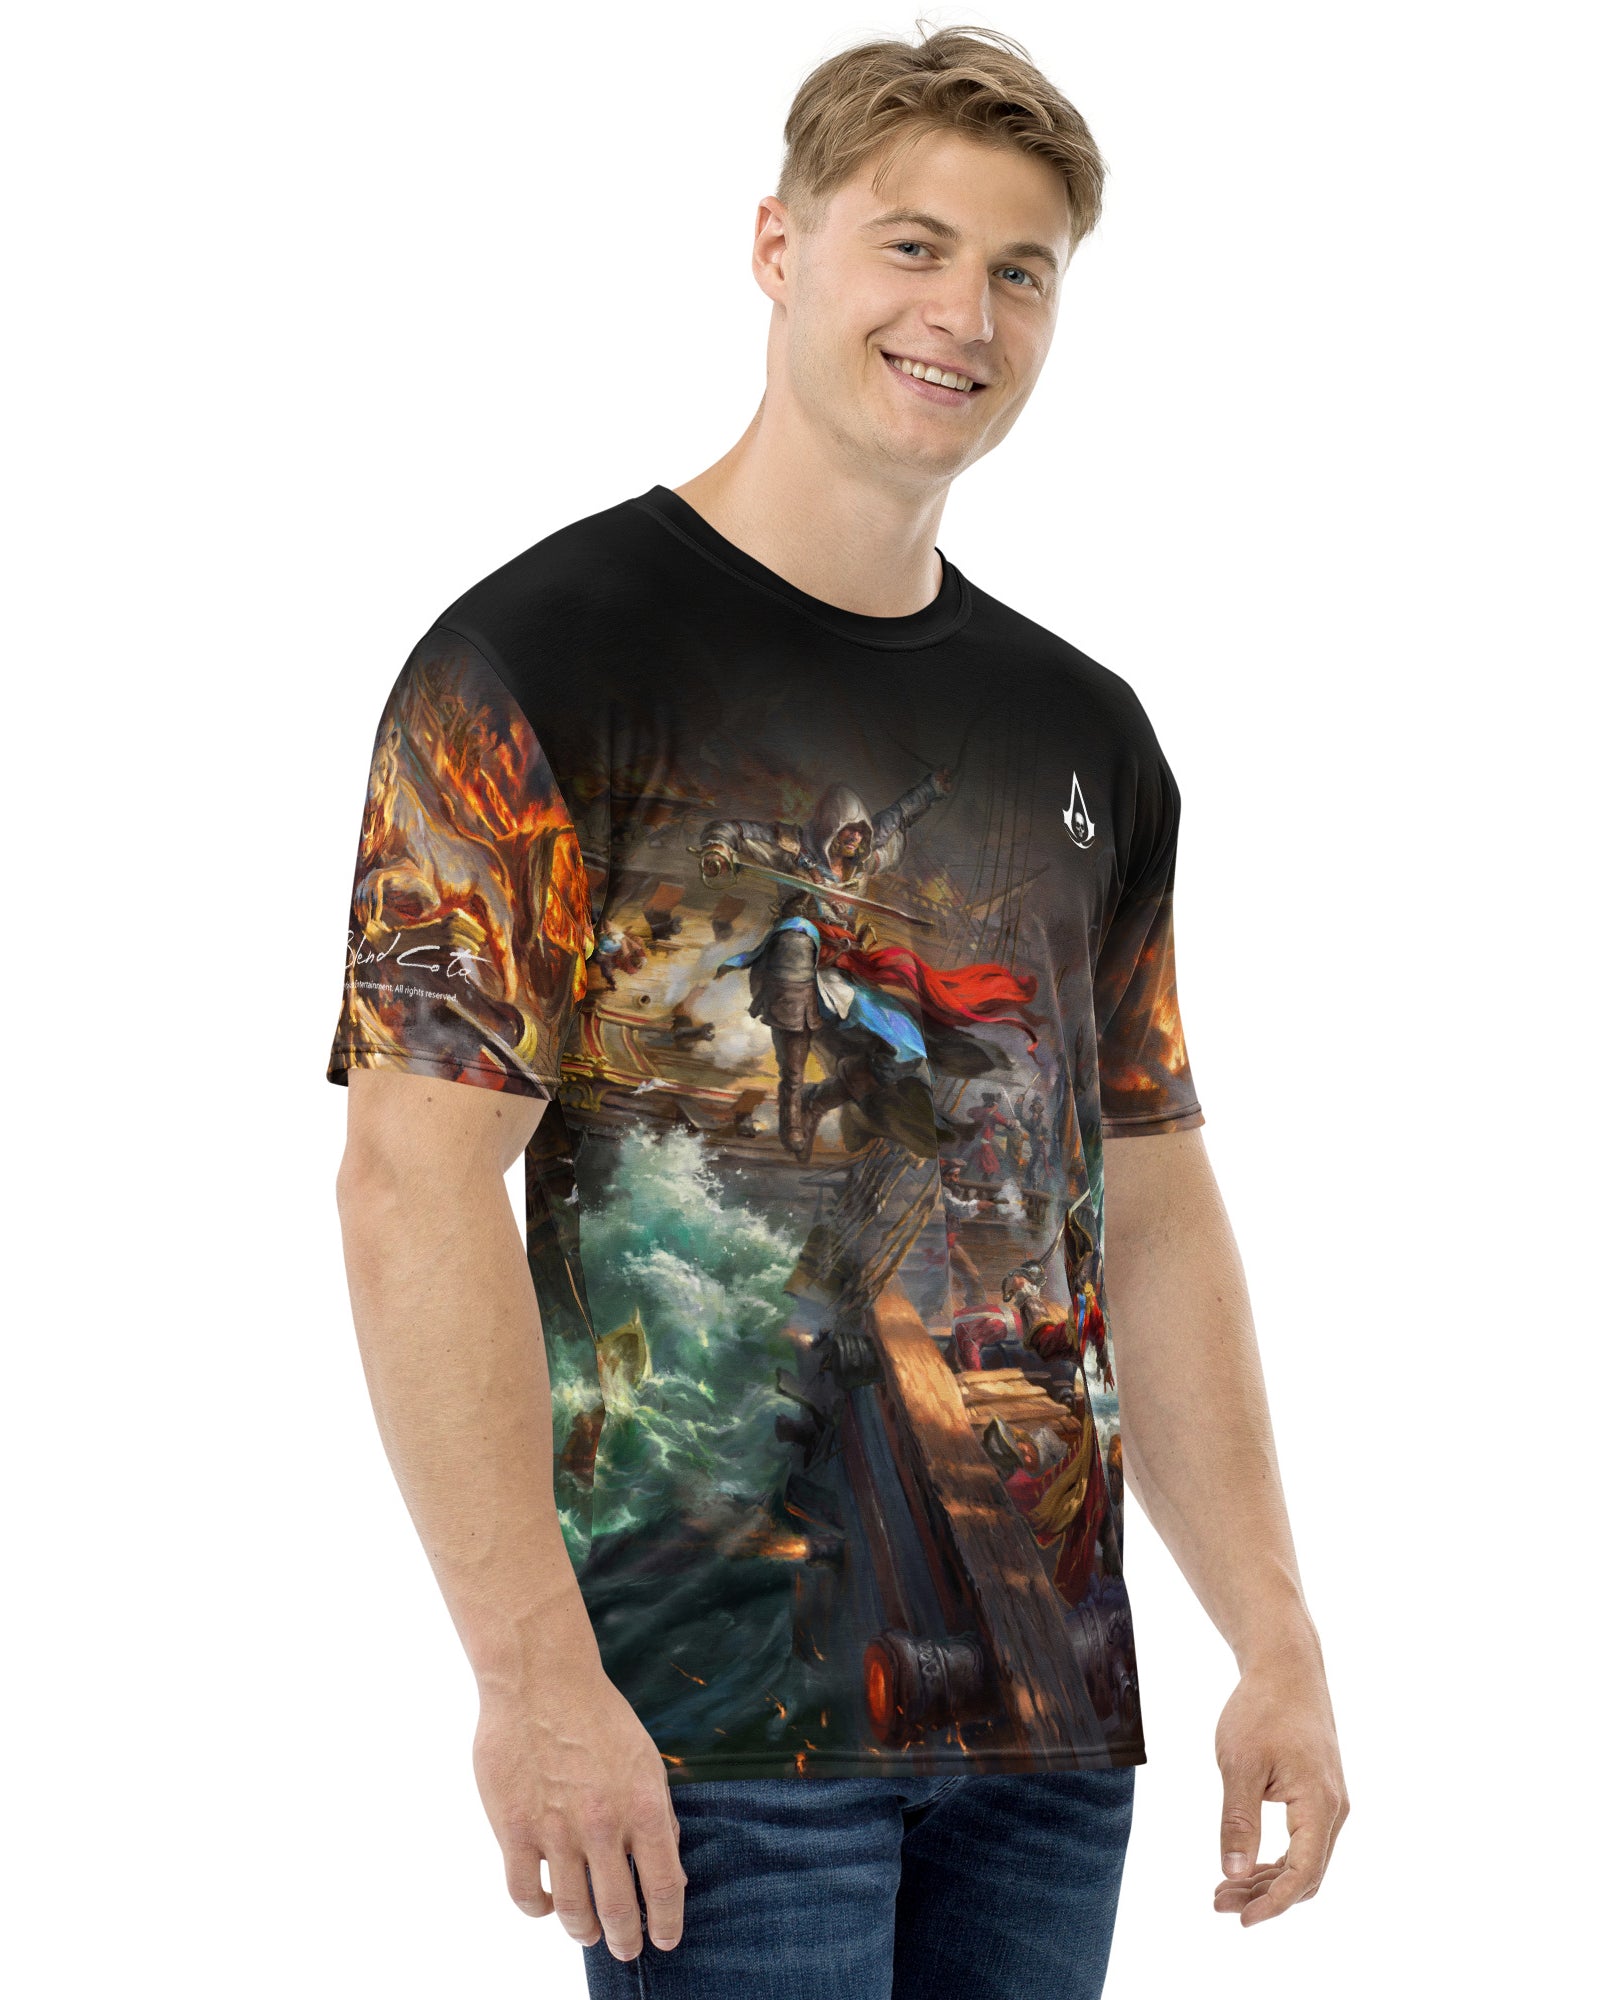 
                  
                    Model wearing Assassin's Creed IV Black Flag and Edward Kenway fighting on ships Jackdaw and Morrigan, Blackbeard on board in Caribbean seas on a fresh fit men's t-shirt.
                  
                